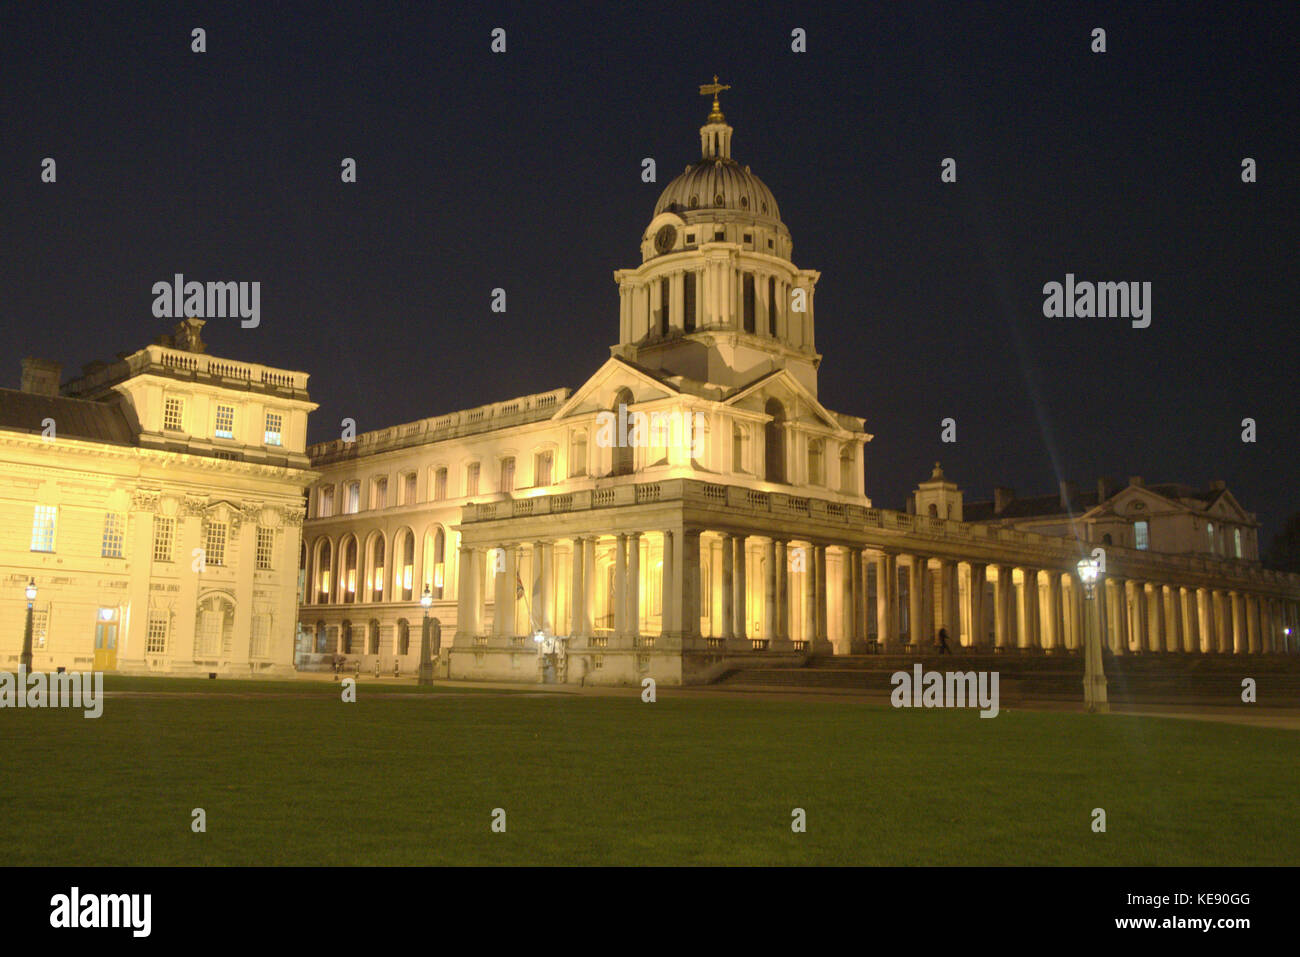 Nighttime view of the Old Royal Naval College in Greenwich, London Stock Photo